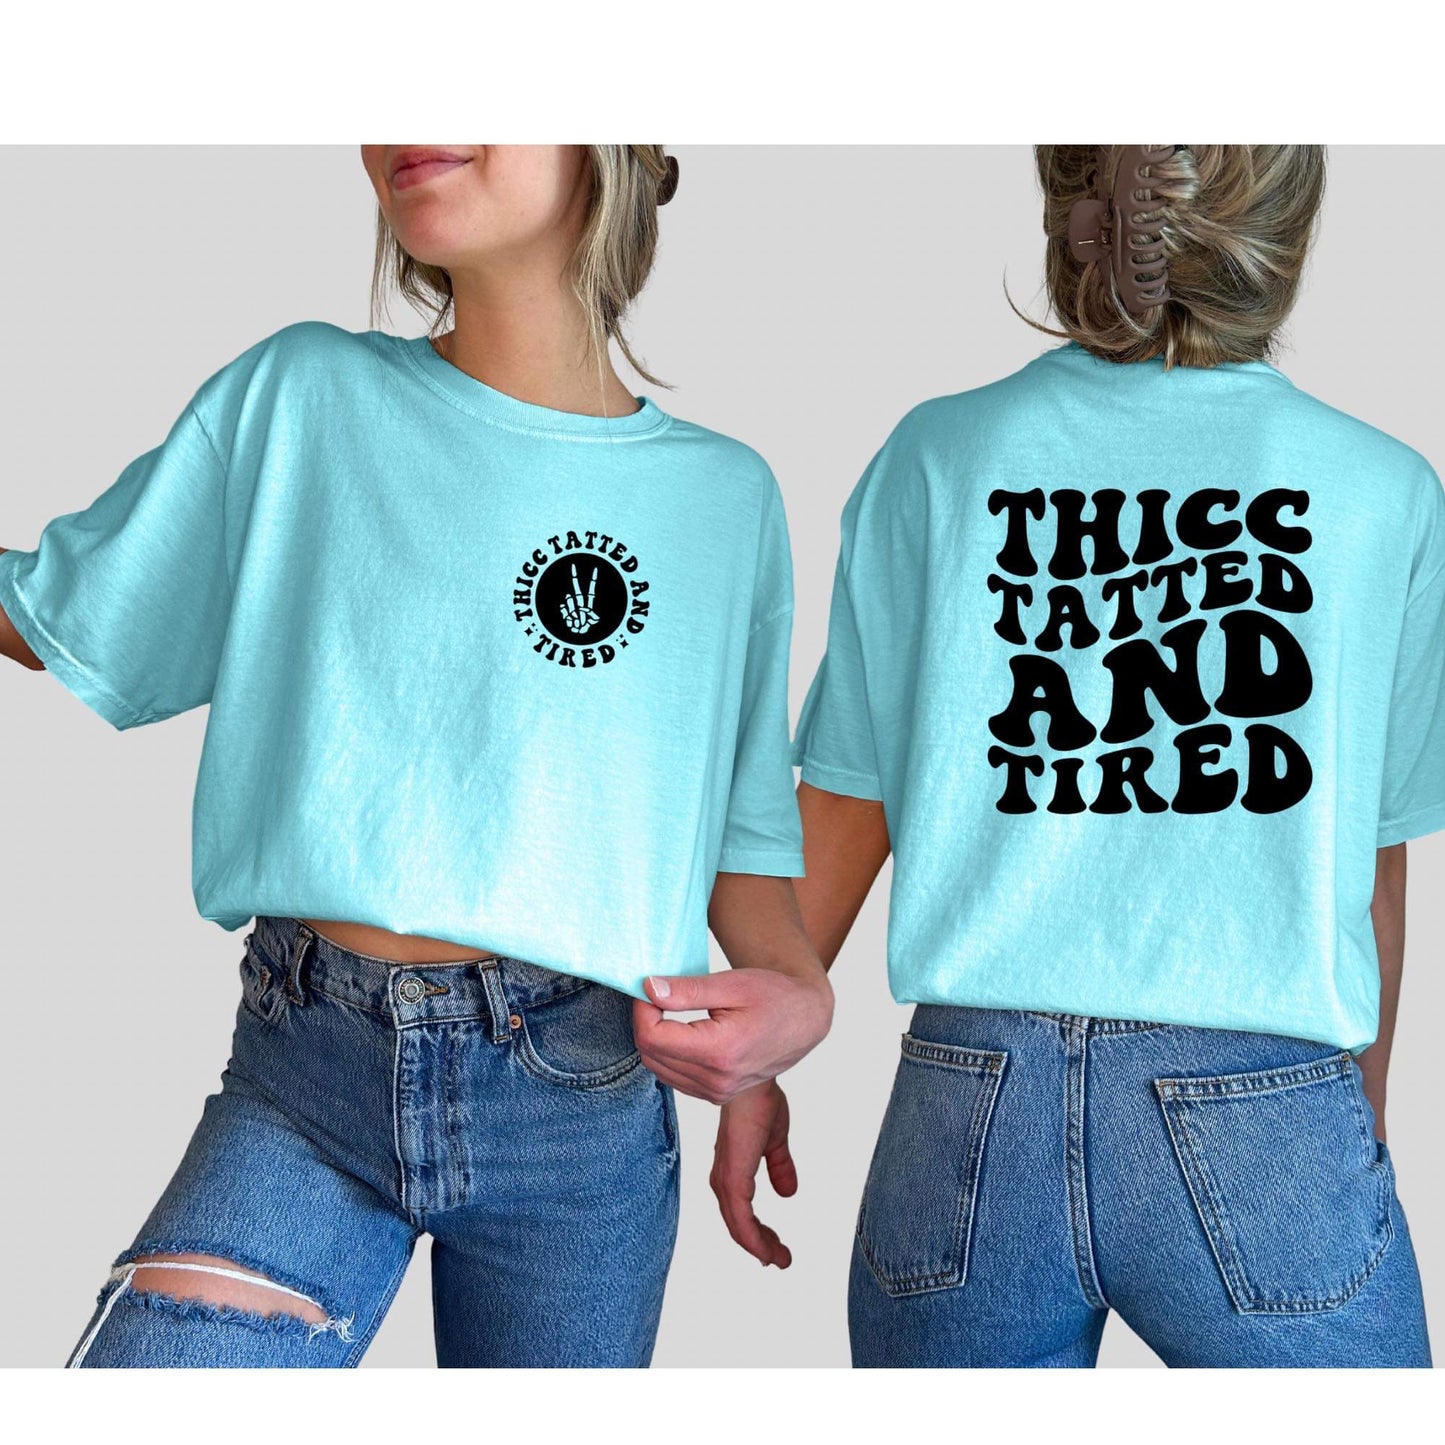 Thic Tatted and Tired- front & back tee